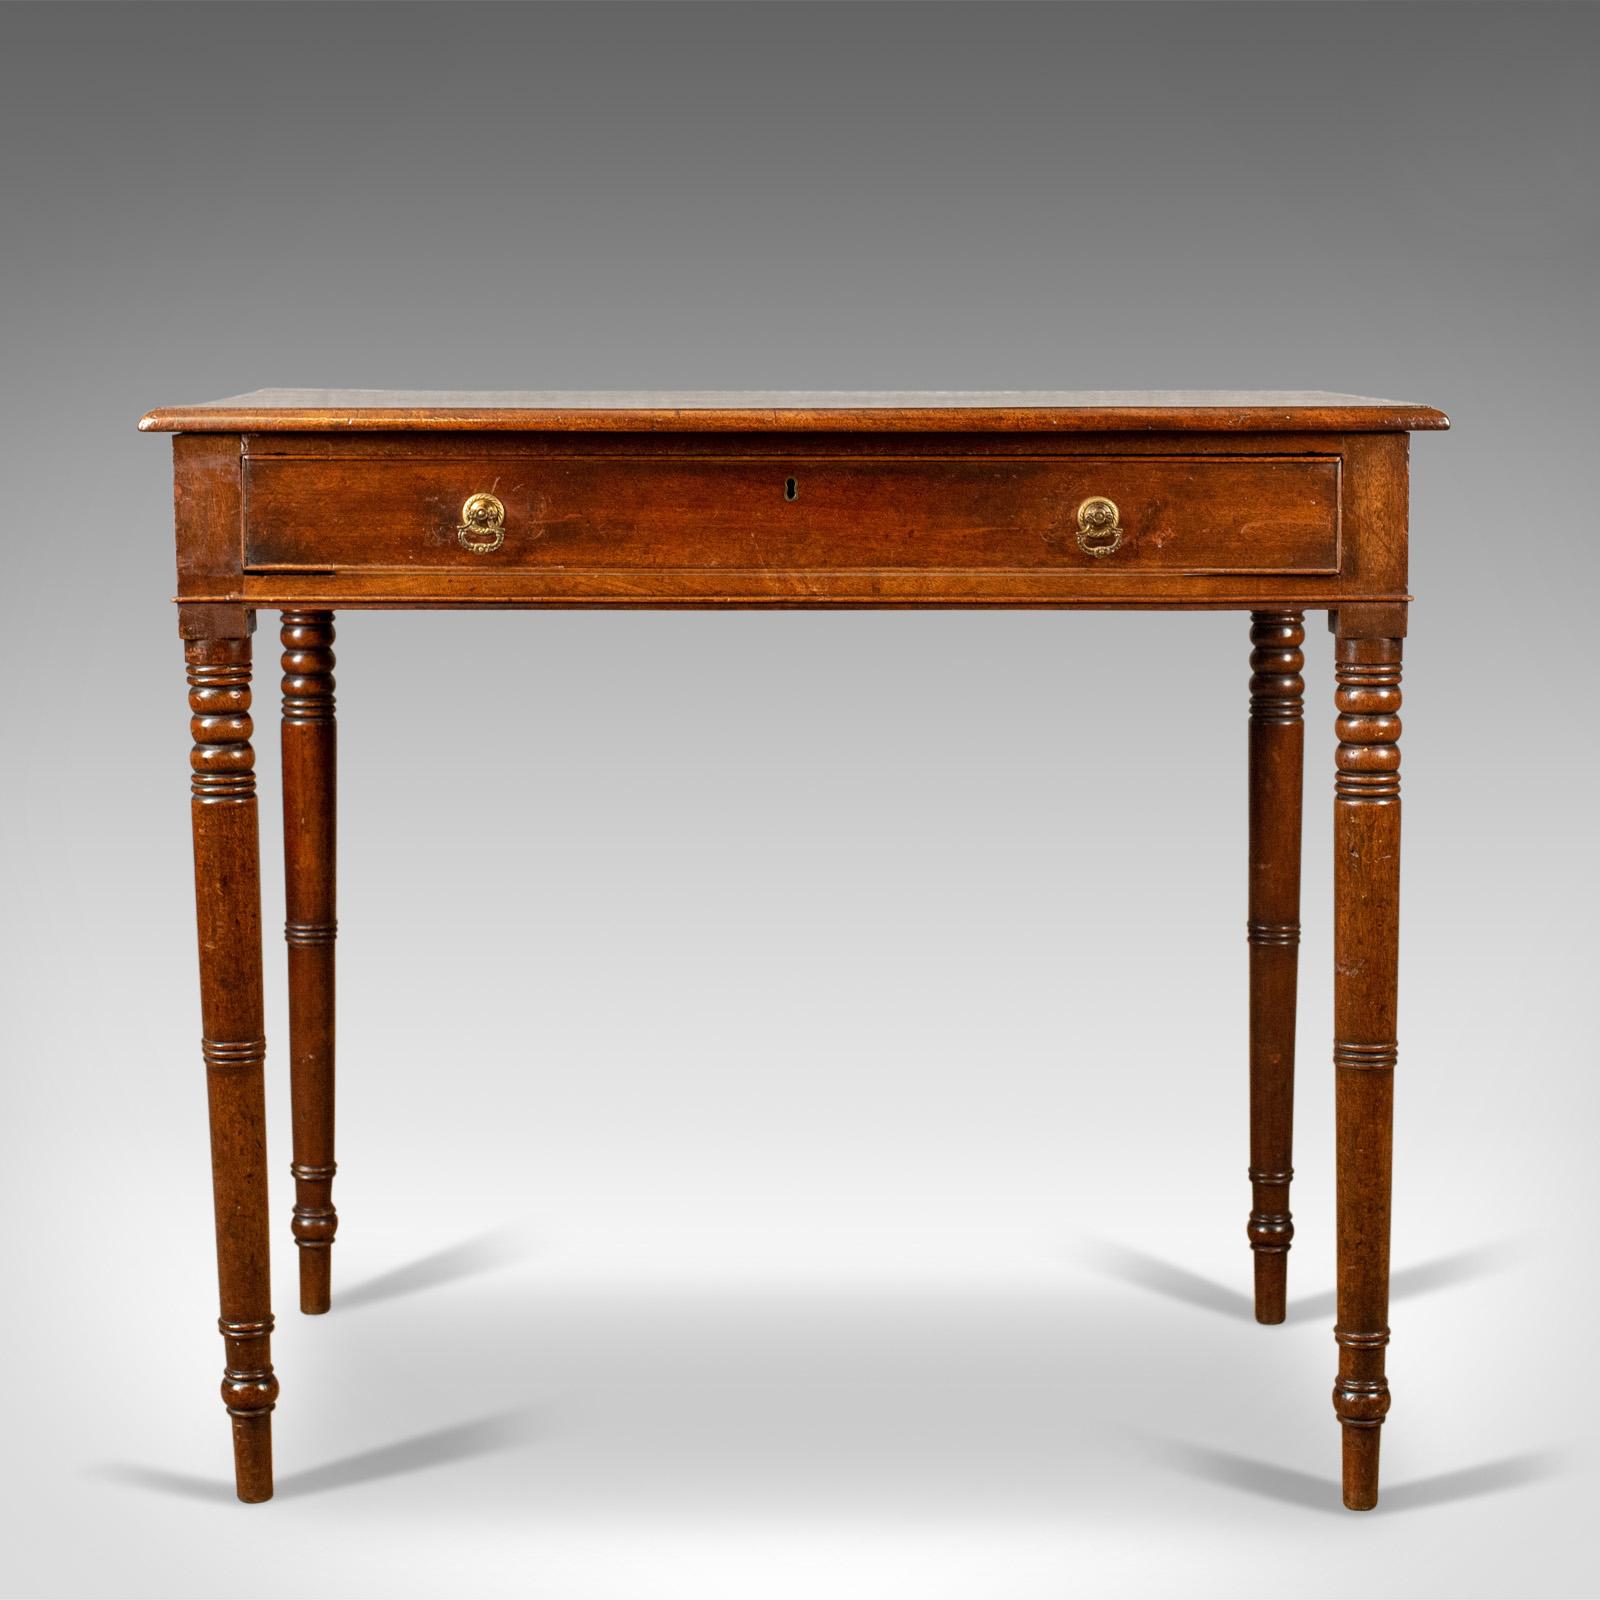 This is an antique side table, an English, Georgian, mahogany, bow fronted console table dating to circa 1800.

An attractive bow fronted side table with elegant lines and in good proportion 
Warm russet hues and grain interest in the wax